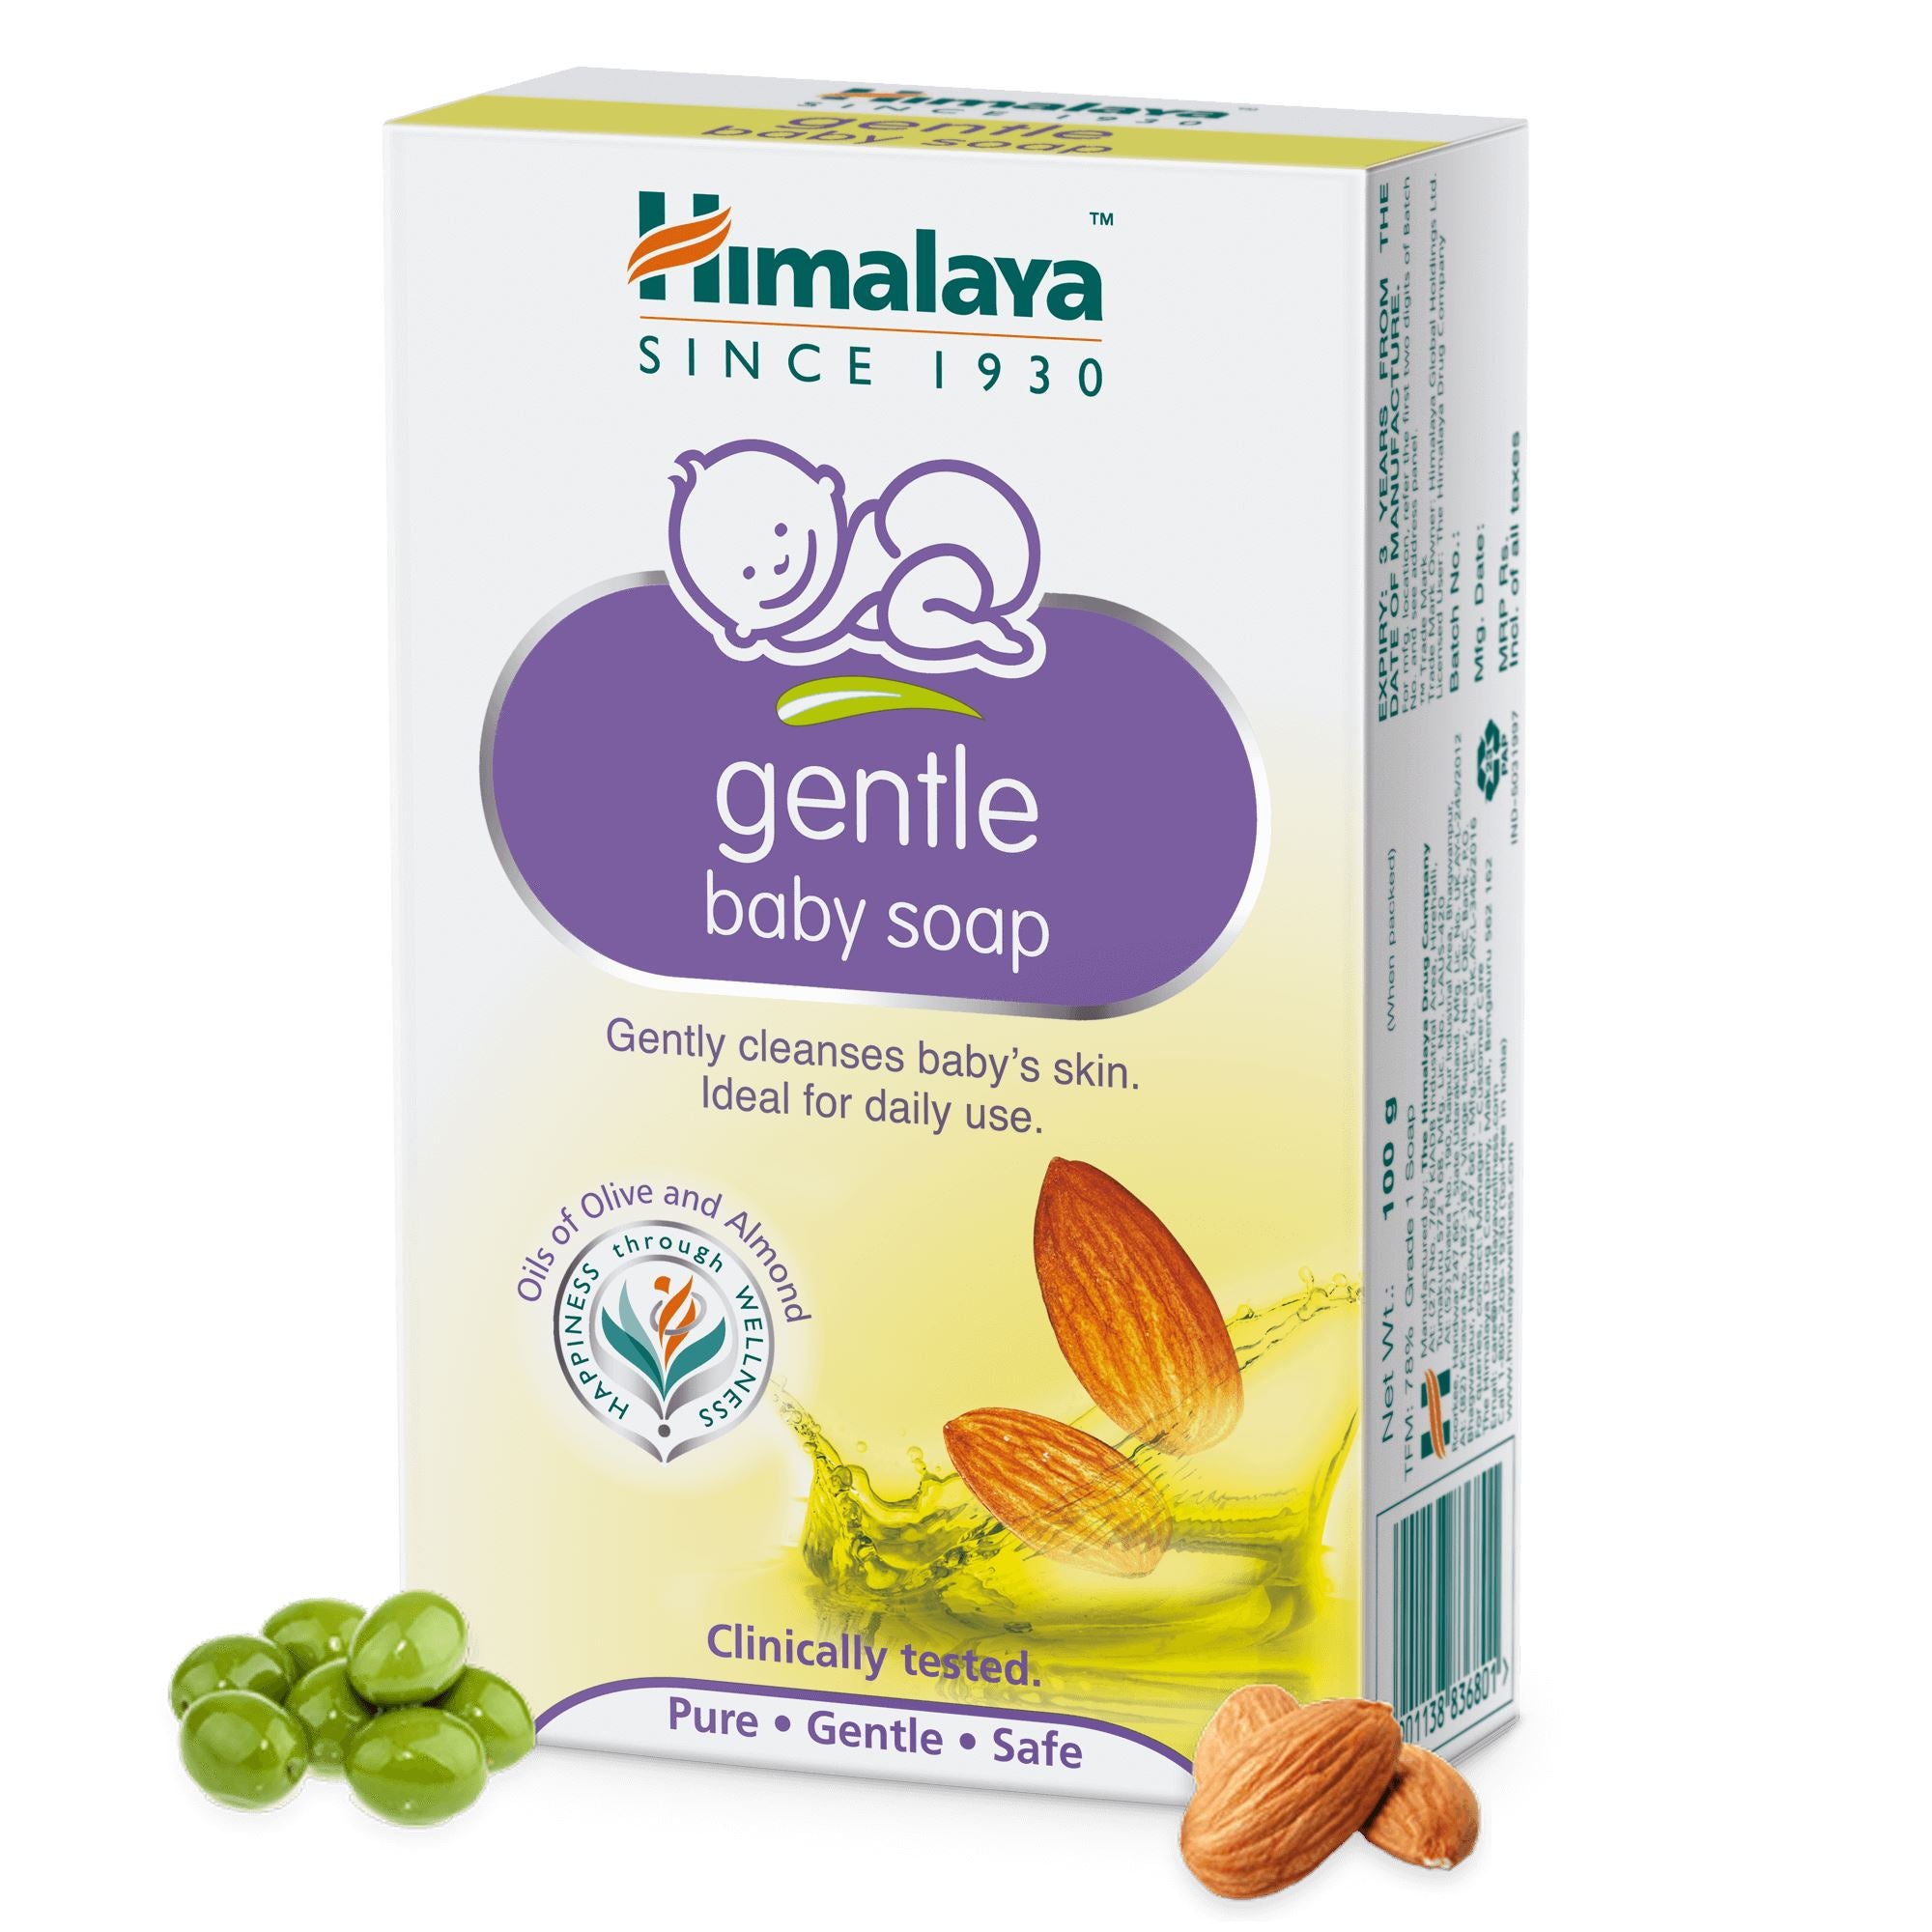 Himalaya Gentle Baby Soap 100g- Gently cleanses baby’s skin